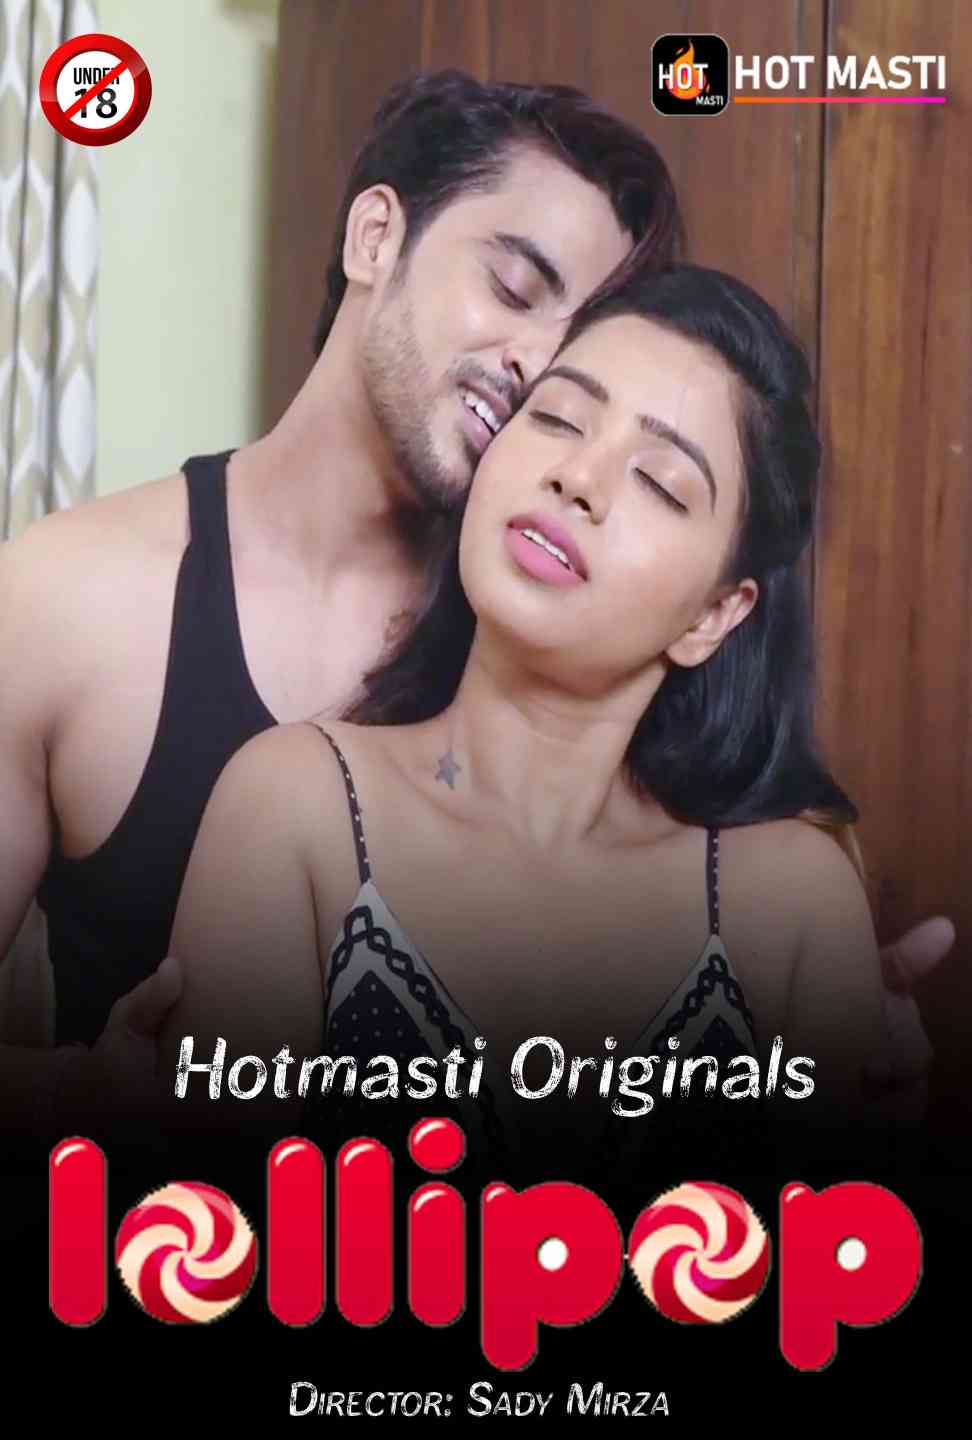 You are currently viewing 18+ Lollipop 2020 S01E01 Hotmasti Originals Web Series 720p HDRip 200MB Download & Watch Online